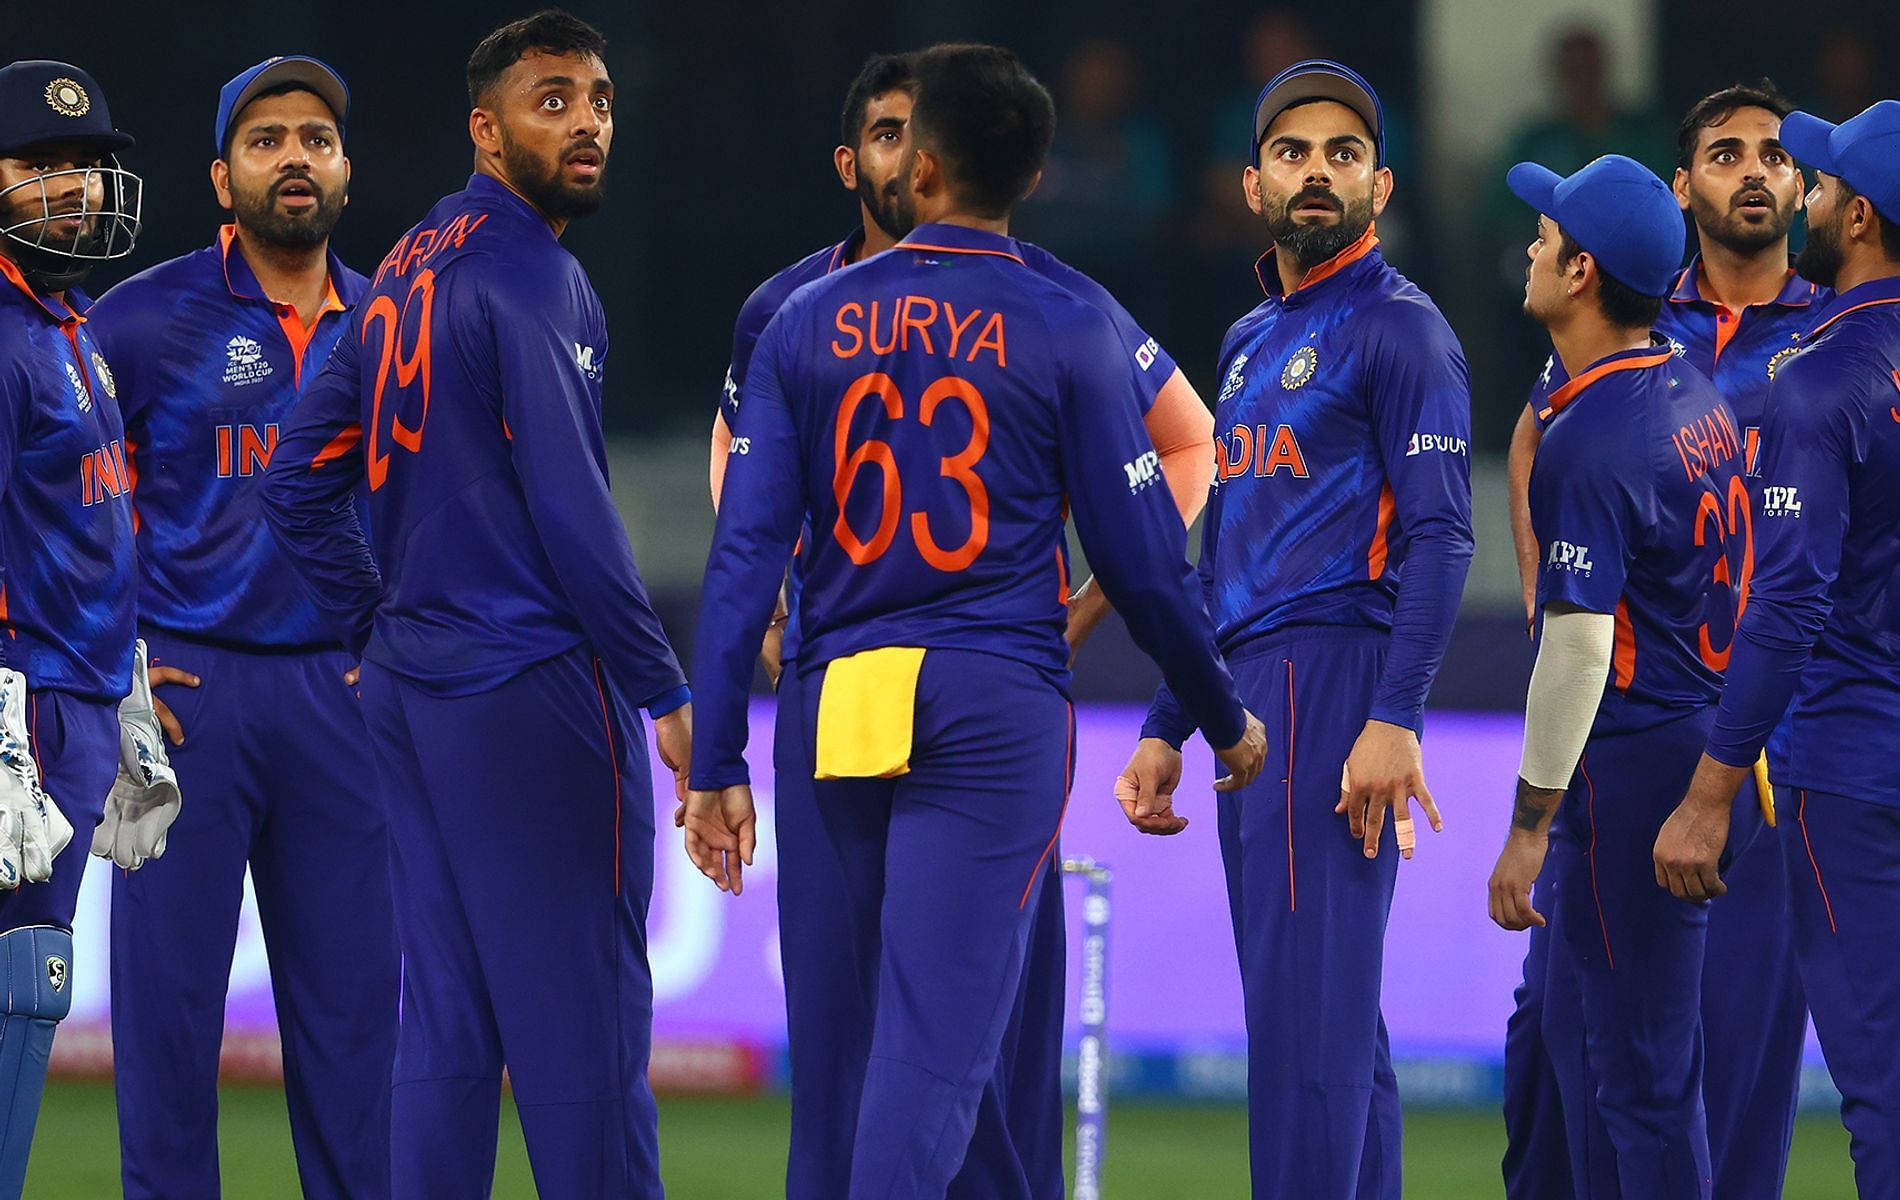 India will be looking for their first win in the 2021 T20 World Cup when they take on New Zealand.